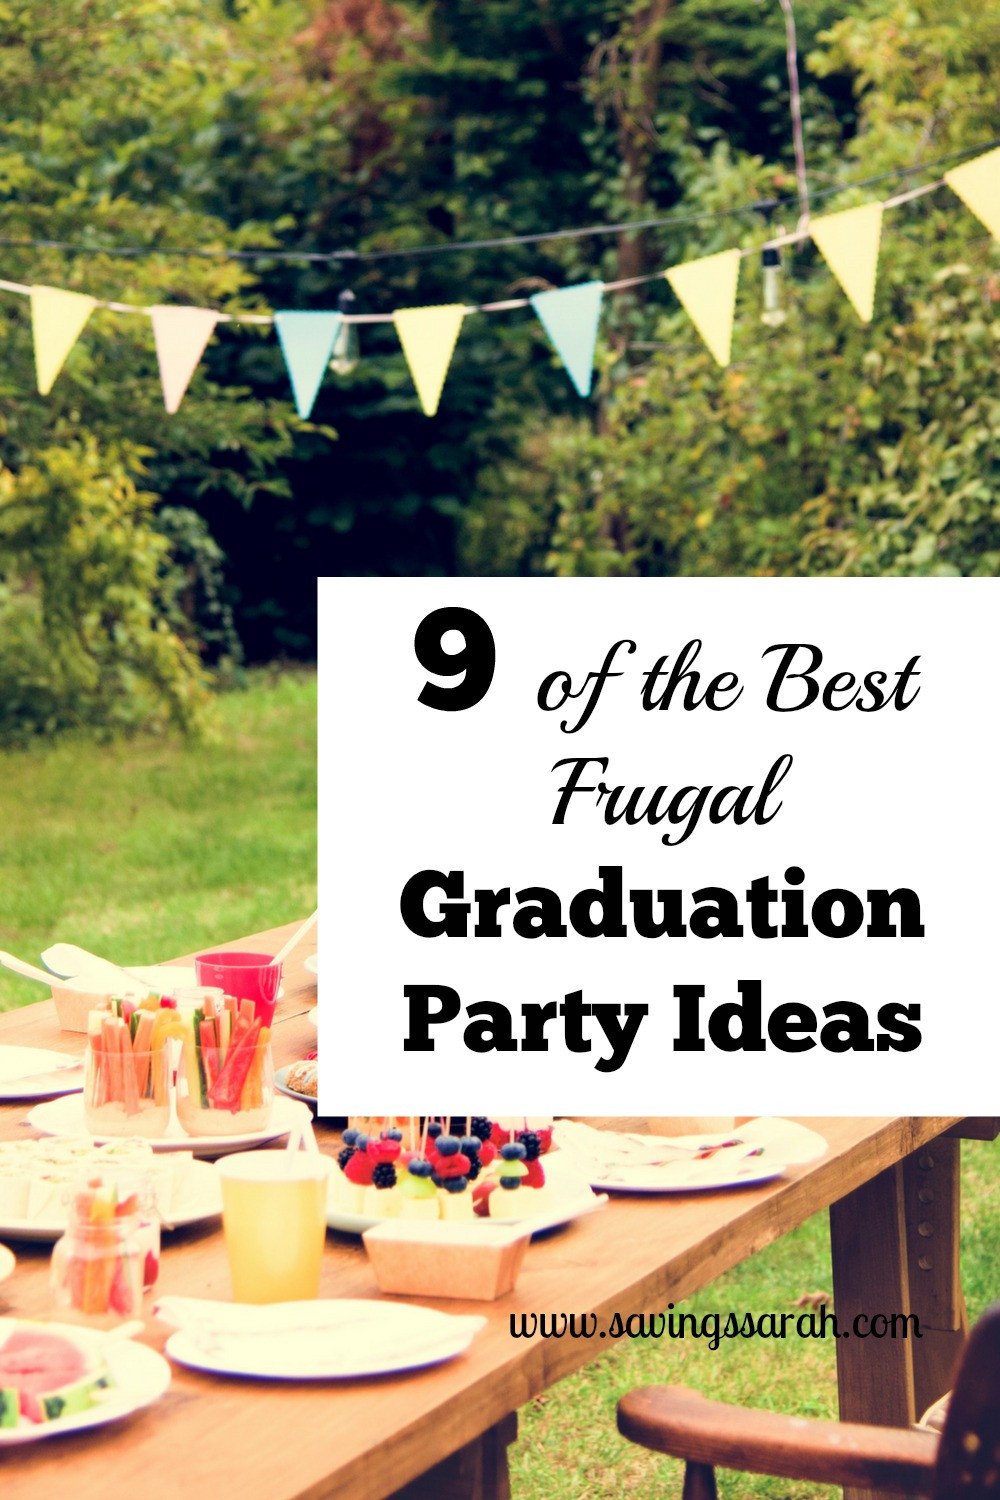 Graduation Party Ideas At A Beach'
 9 the Best Frugal Graduation Party Ideas Earning and